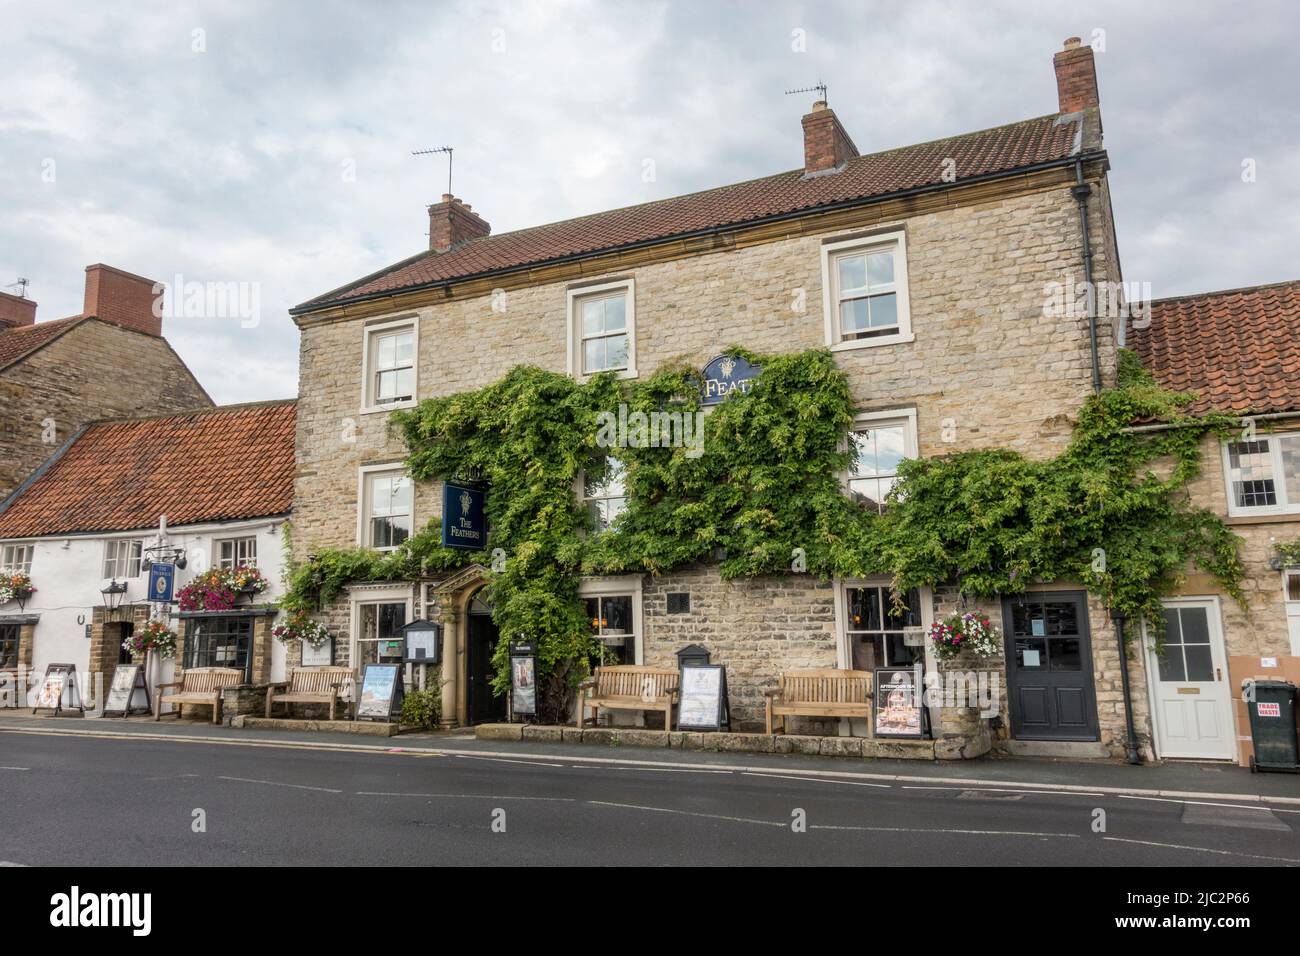 The Feathers Hotel and traditional inn in Helmsley, a market town in Ryedale, North Yorkshire, England. Stock Photo